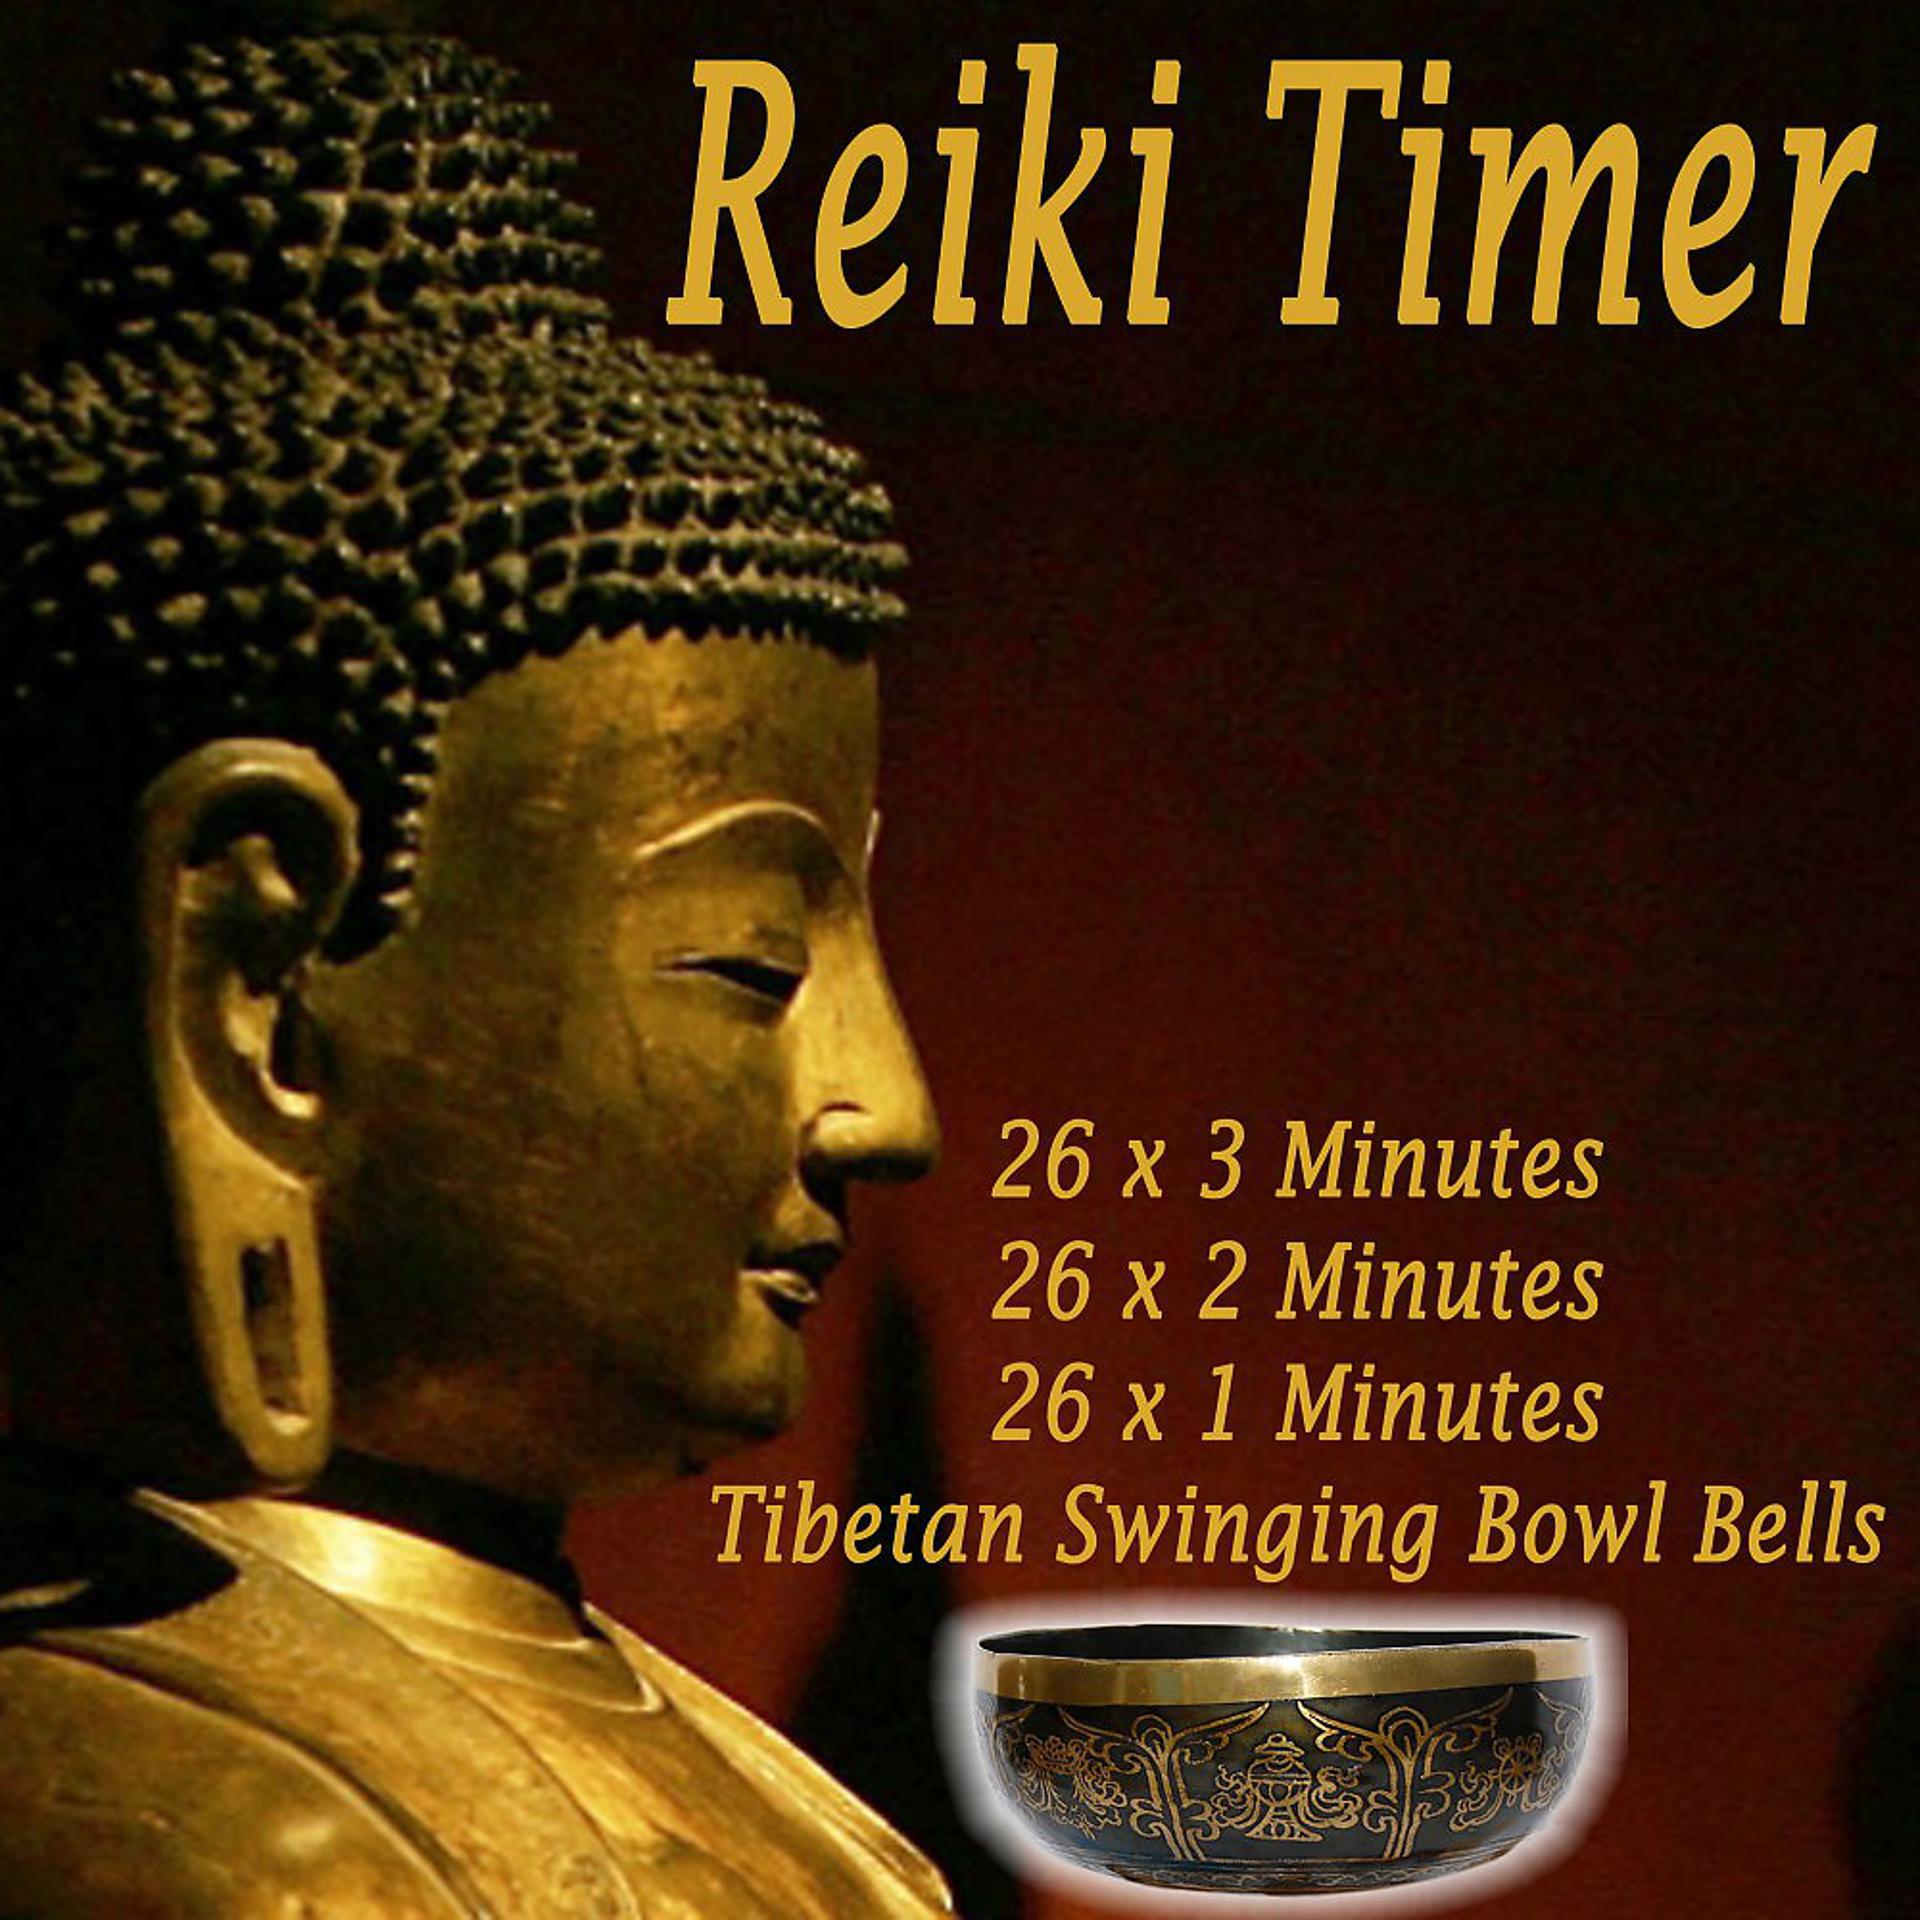 Постер альбома Reiki Timer - 26 X 3 Minutes, 26 X 2 Minutes & 26 X 1 Minute Tibetan Singing Bowls Bells in a Silence Background